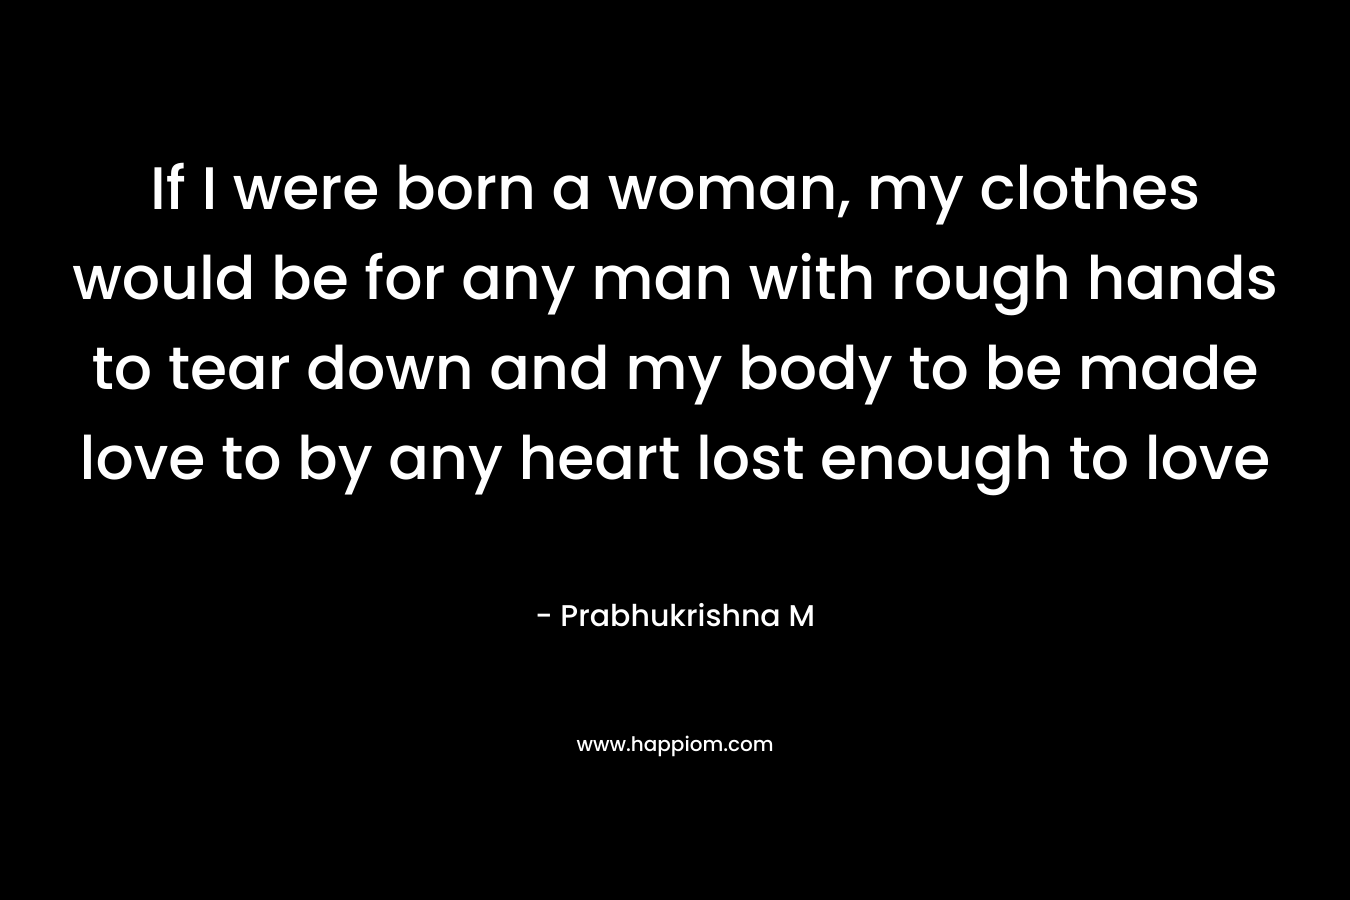 If I were born a woman, my clothes would be for any man with rough hands to tear down and my body to be made love to by any heart lost enough to love – Prabhukrishna M